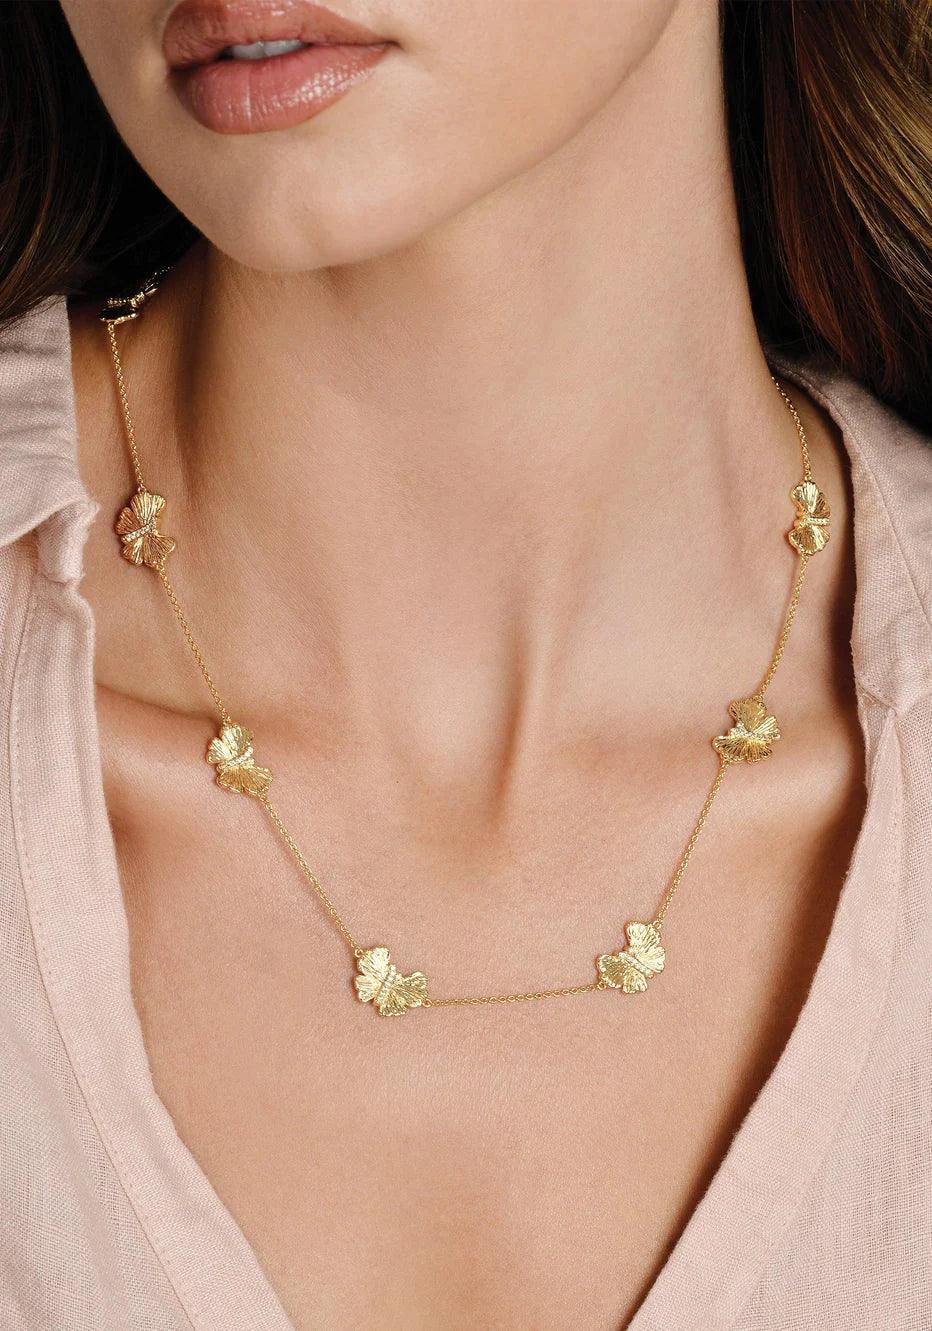 Butterfly Gold Station Necklace - BTK COLLECTION